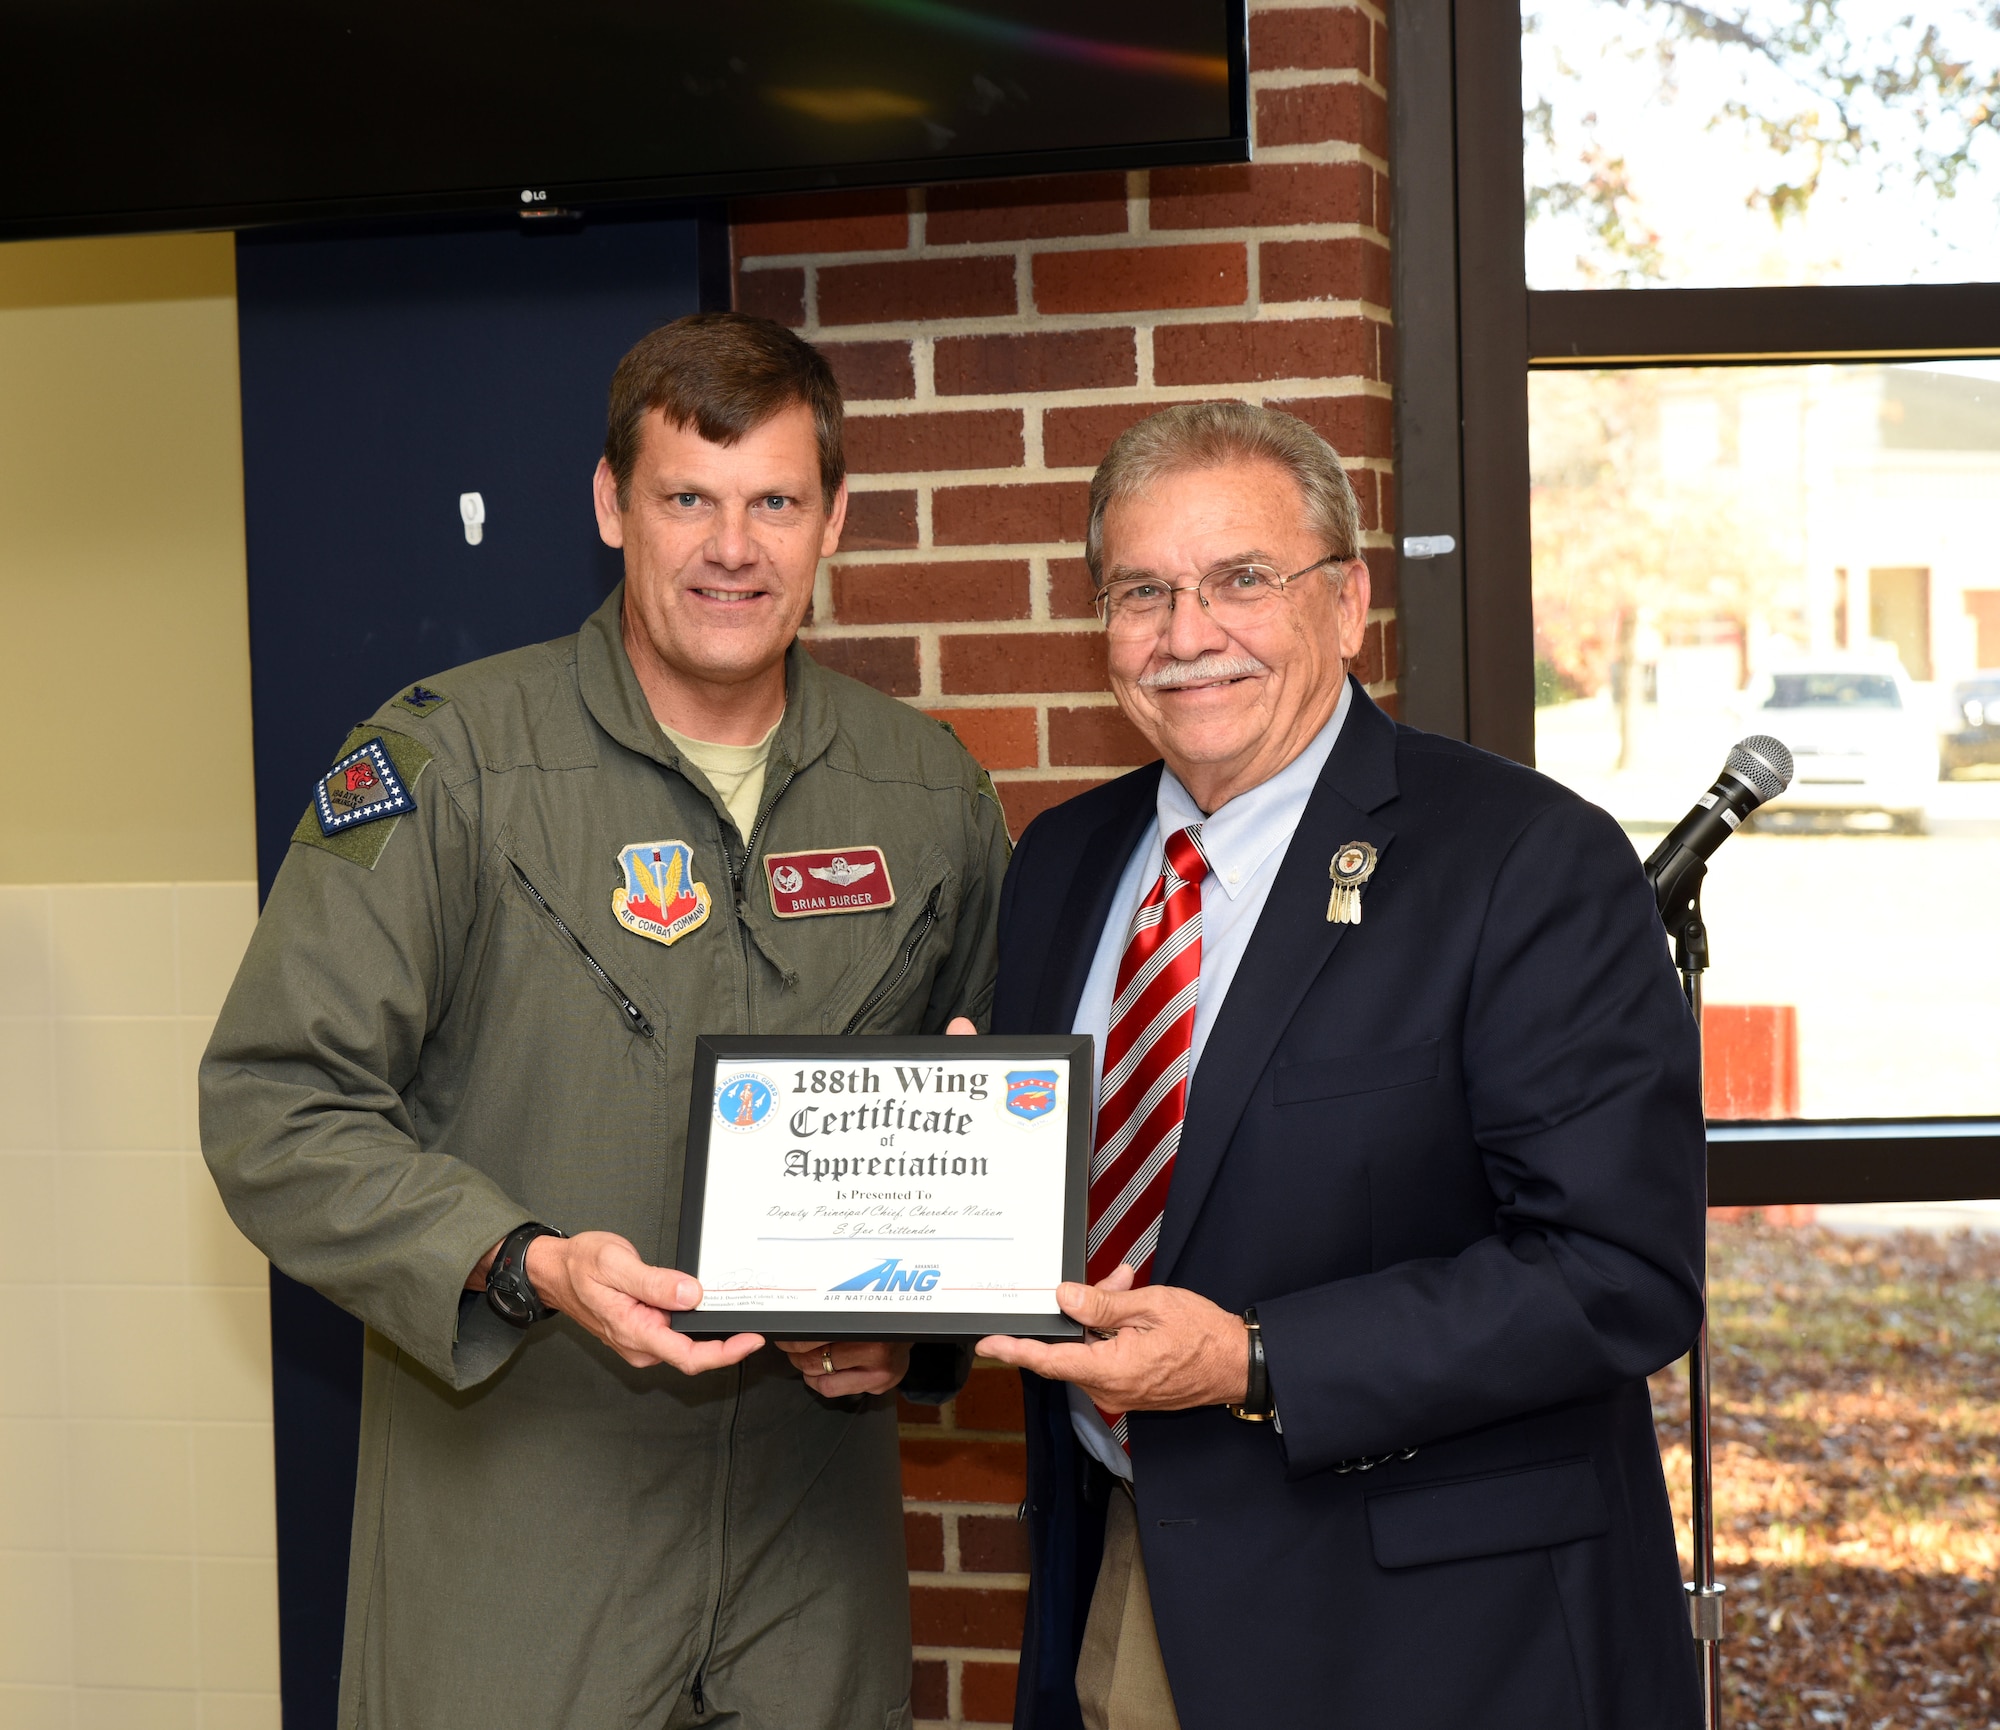 Joe Crittenden, deputy principal chief of the Cherokee Nation, receives a certificate of appreciation from Col. Brian Burger, 188th Operations Group commander, at Ebbing Air National Guard Base, Fort Smith, Ark., for his participation in the 188th Wing’s Native American Indian Heritage Month celebration Nov. 18, 2015. Crittenden served two terms as a Cherokee Nation council member and was elected as deputy principal chief in 2011. (U.S. Air National Guard photo by Senior Airman Cody Martin/Released)